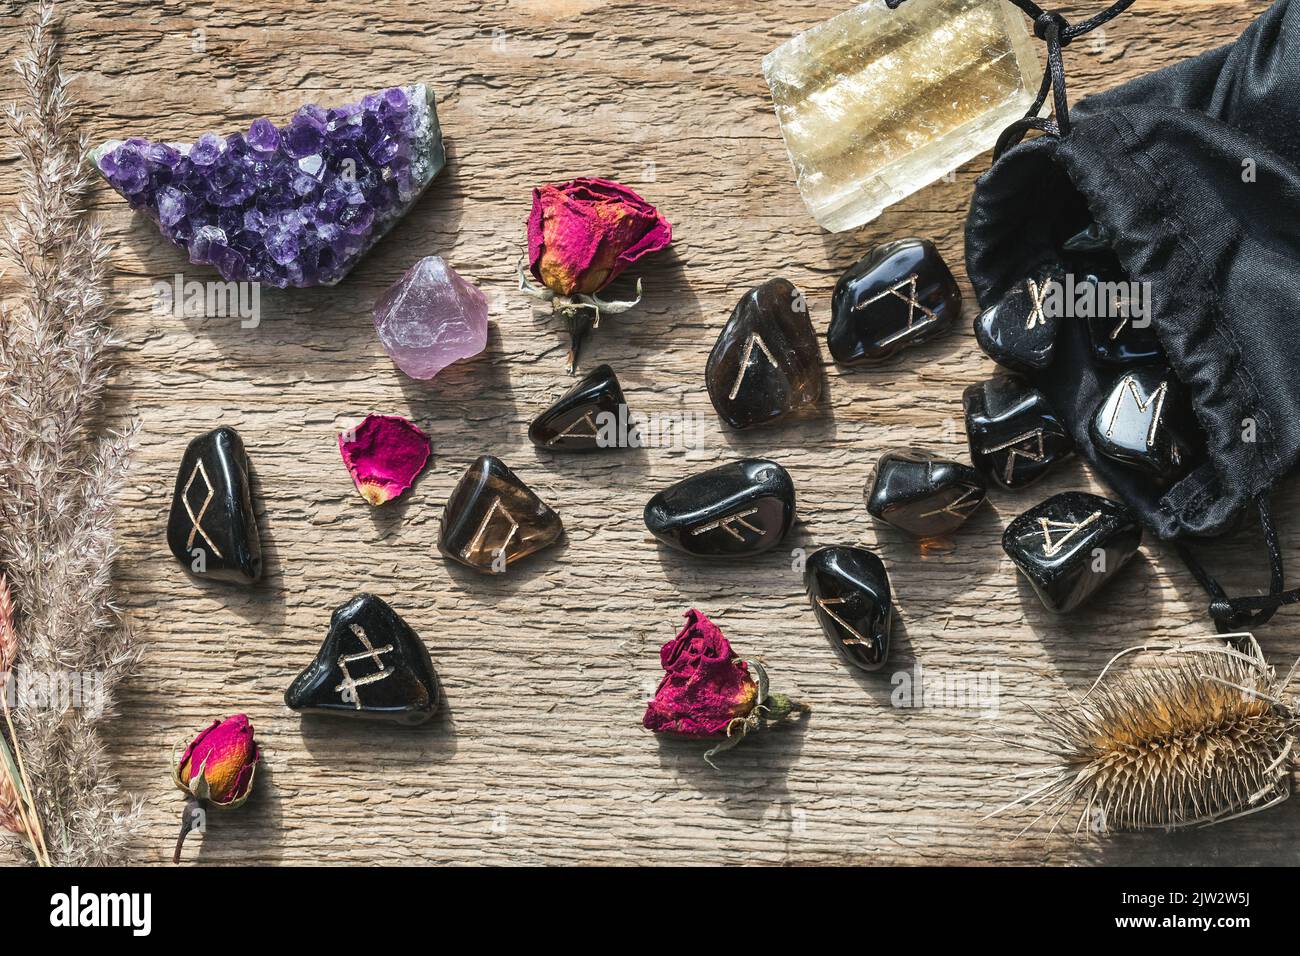 Set of different crystals and rune stones on wooden background. Amethyst cluster, fluorite, calcite, rose quartz, magical herbs and runes. Spiritual p Stock Photo